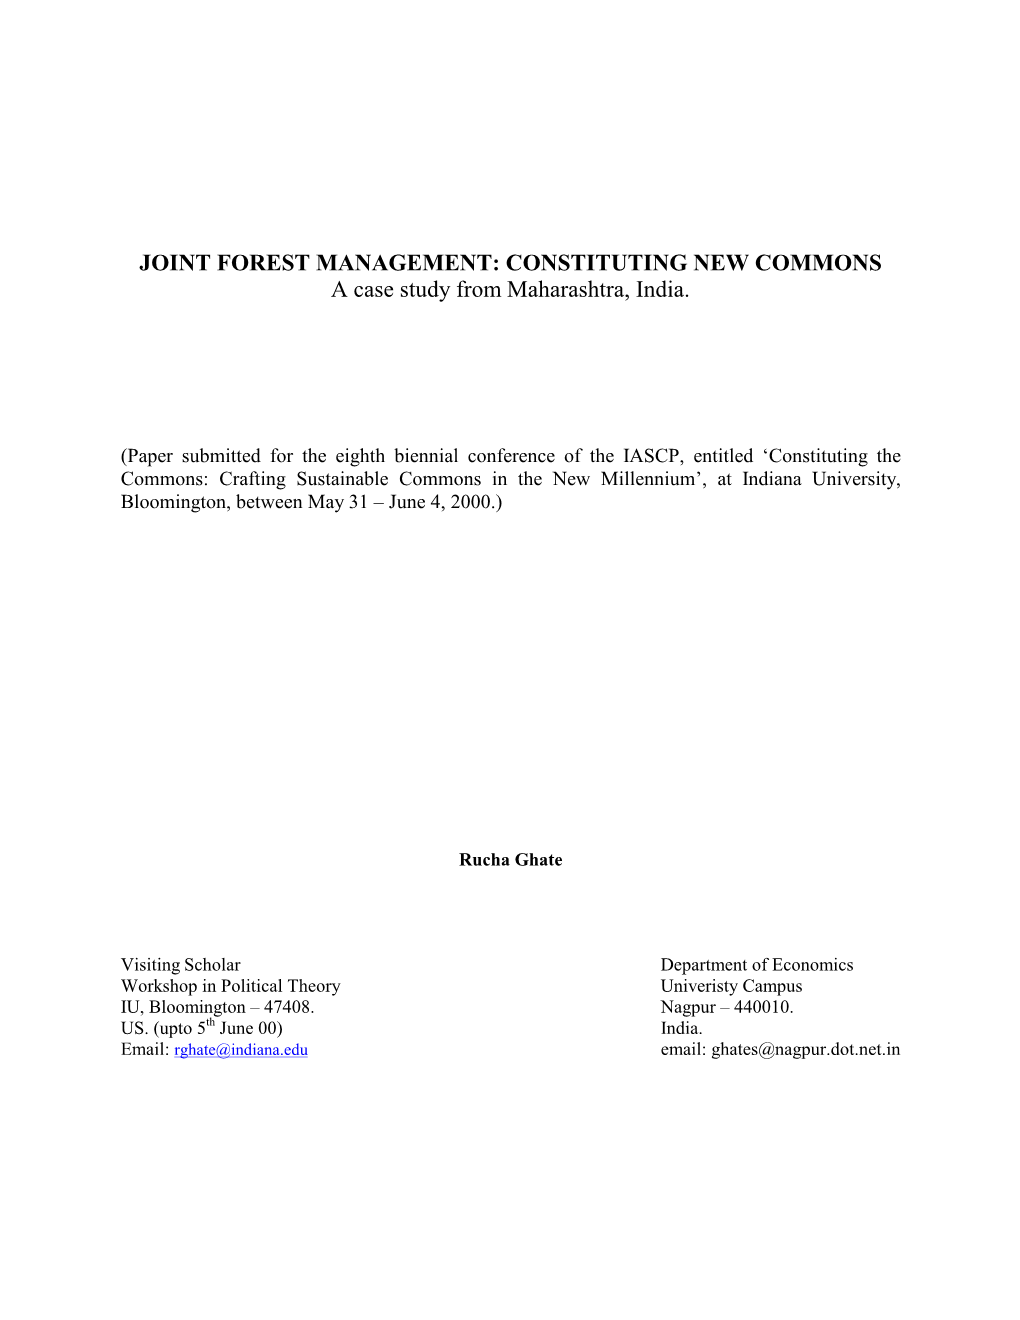 JOINT FOREST MANAGEMENT: CONSTITUTING NEW COMMONS a Case Study from Maharashtra, India